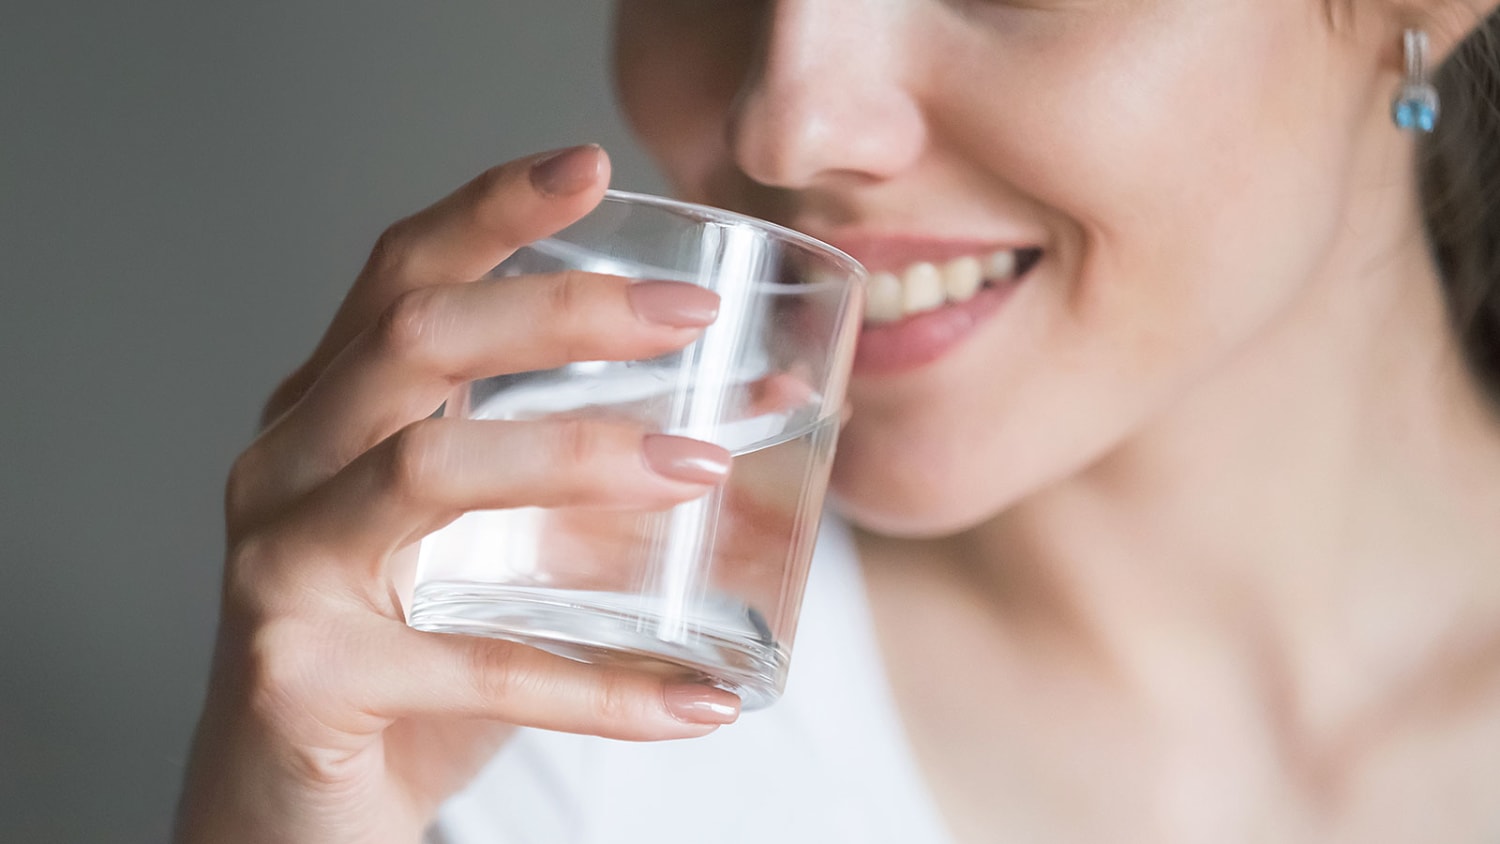 Apparently the secret to happiness depends on how much water you drink